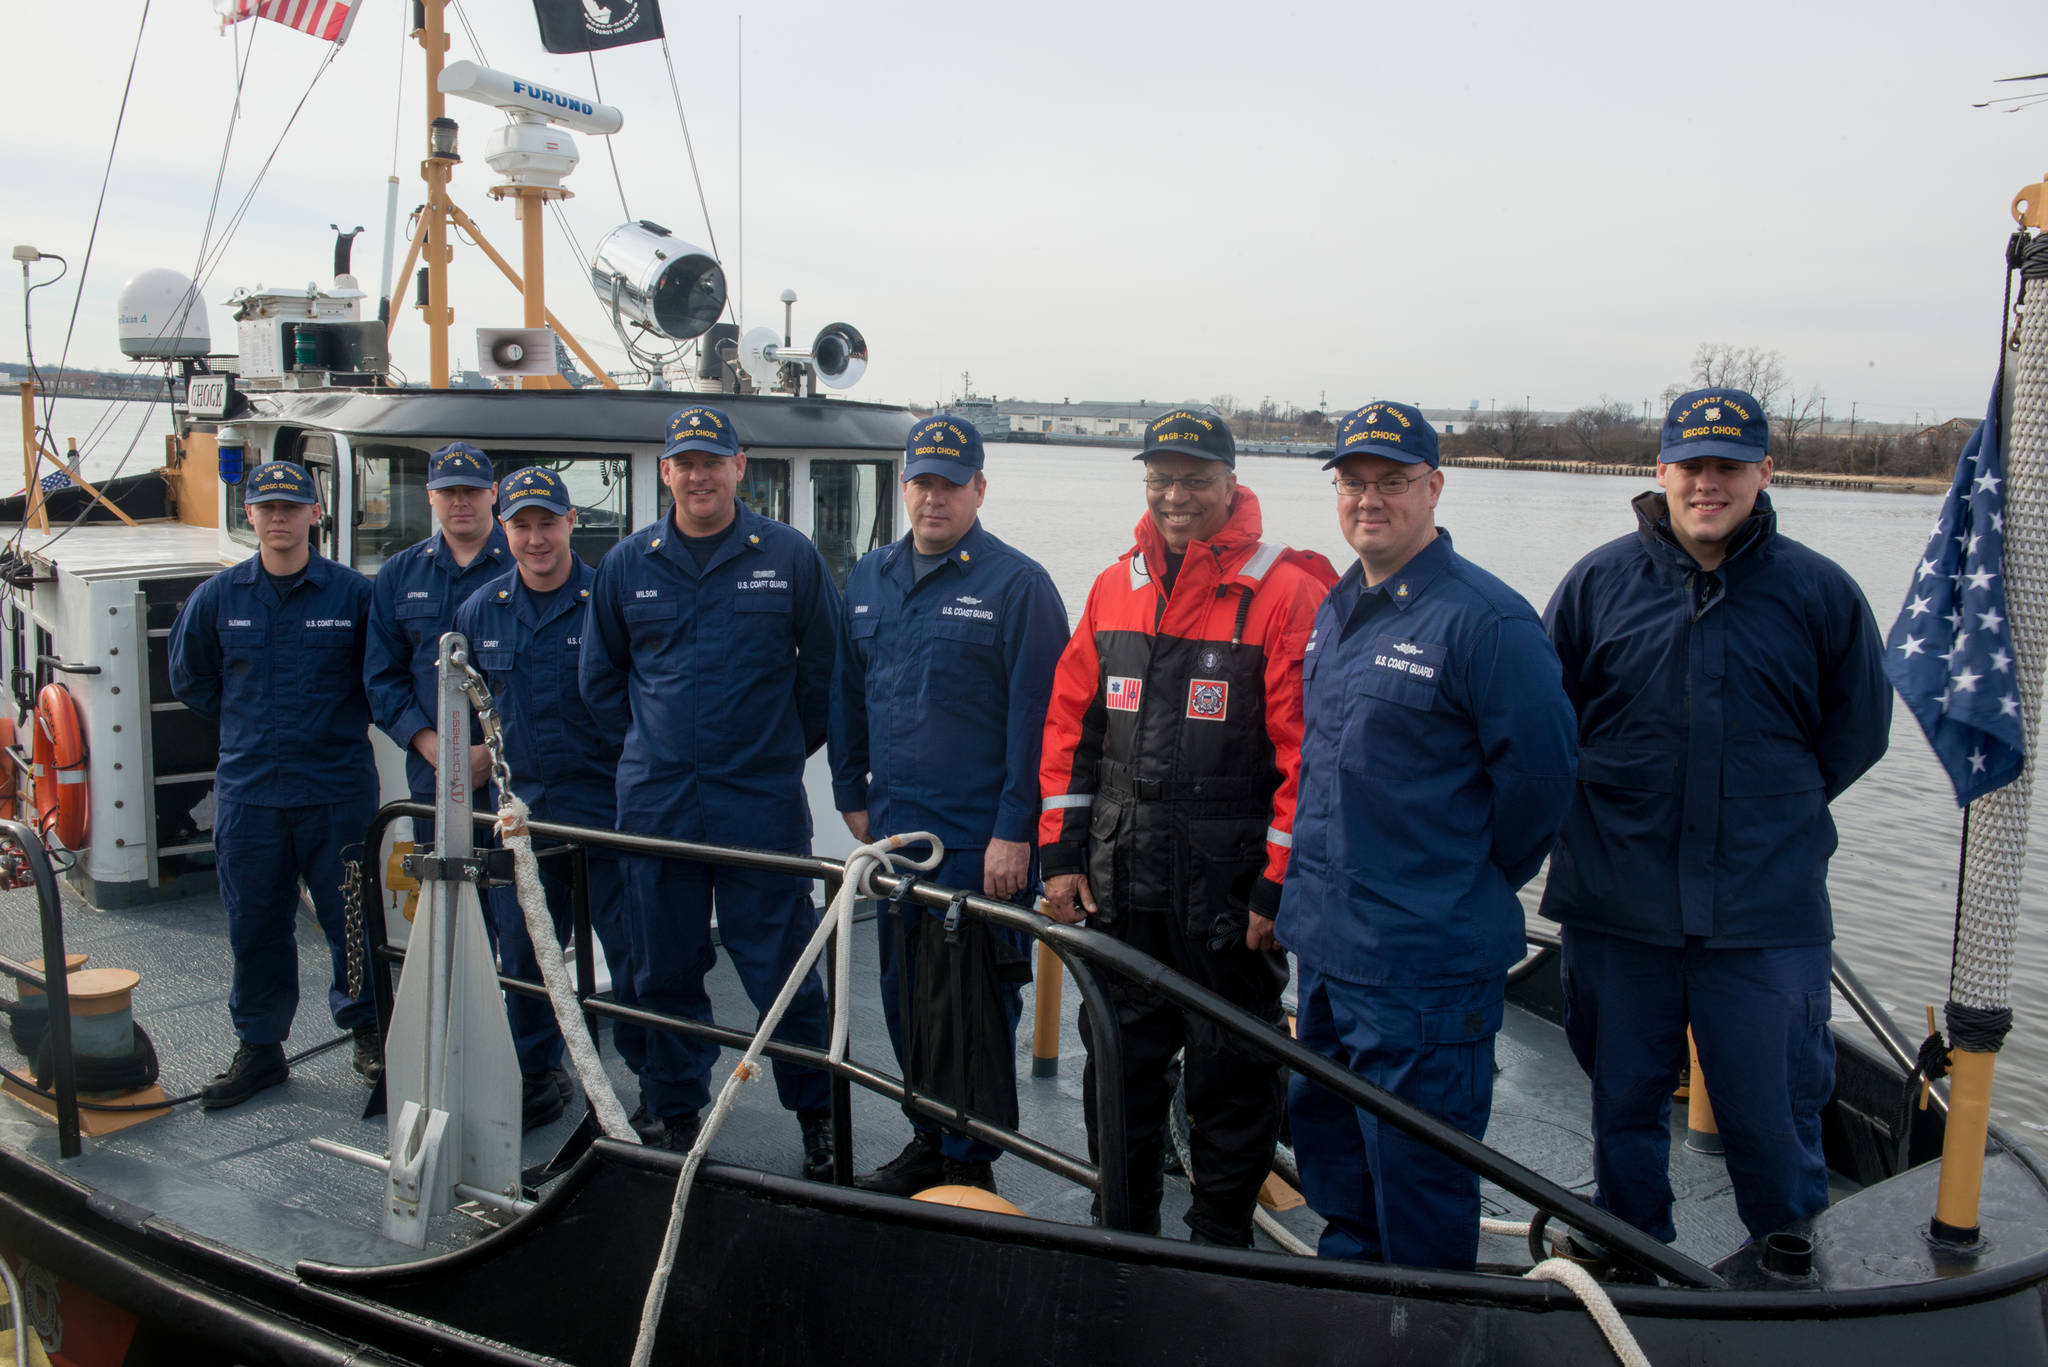 Lt. Gov. Boyd K. Rutherford (orange suit) poses with crew members of the Coast Guard Cutter Chock during the lieutenant governor’s visit aboard the cutter moored up at Curtis Bay in Maryland, Wednesday, Jan. 20, 2016. Rutherford visited with Coast Guard crews from Sector Baltimore, Station Curtis Bay and the cutter Chock. Chief Petty Officer Michael Kozloski, later promoted to Chief Warrant Officer, is second from right.(U.S. Coast Guard photo by Petty Officer David R. Marin)